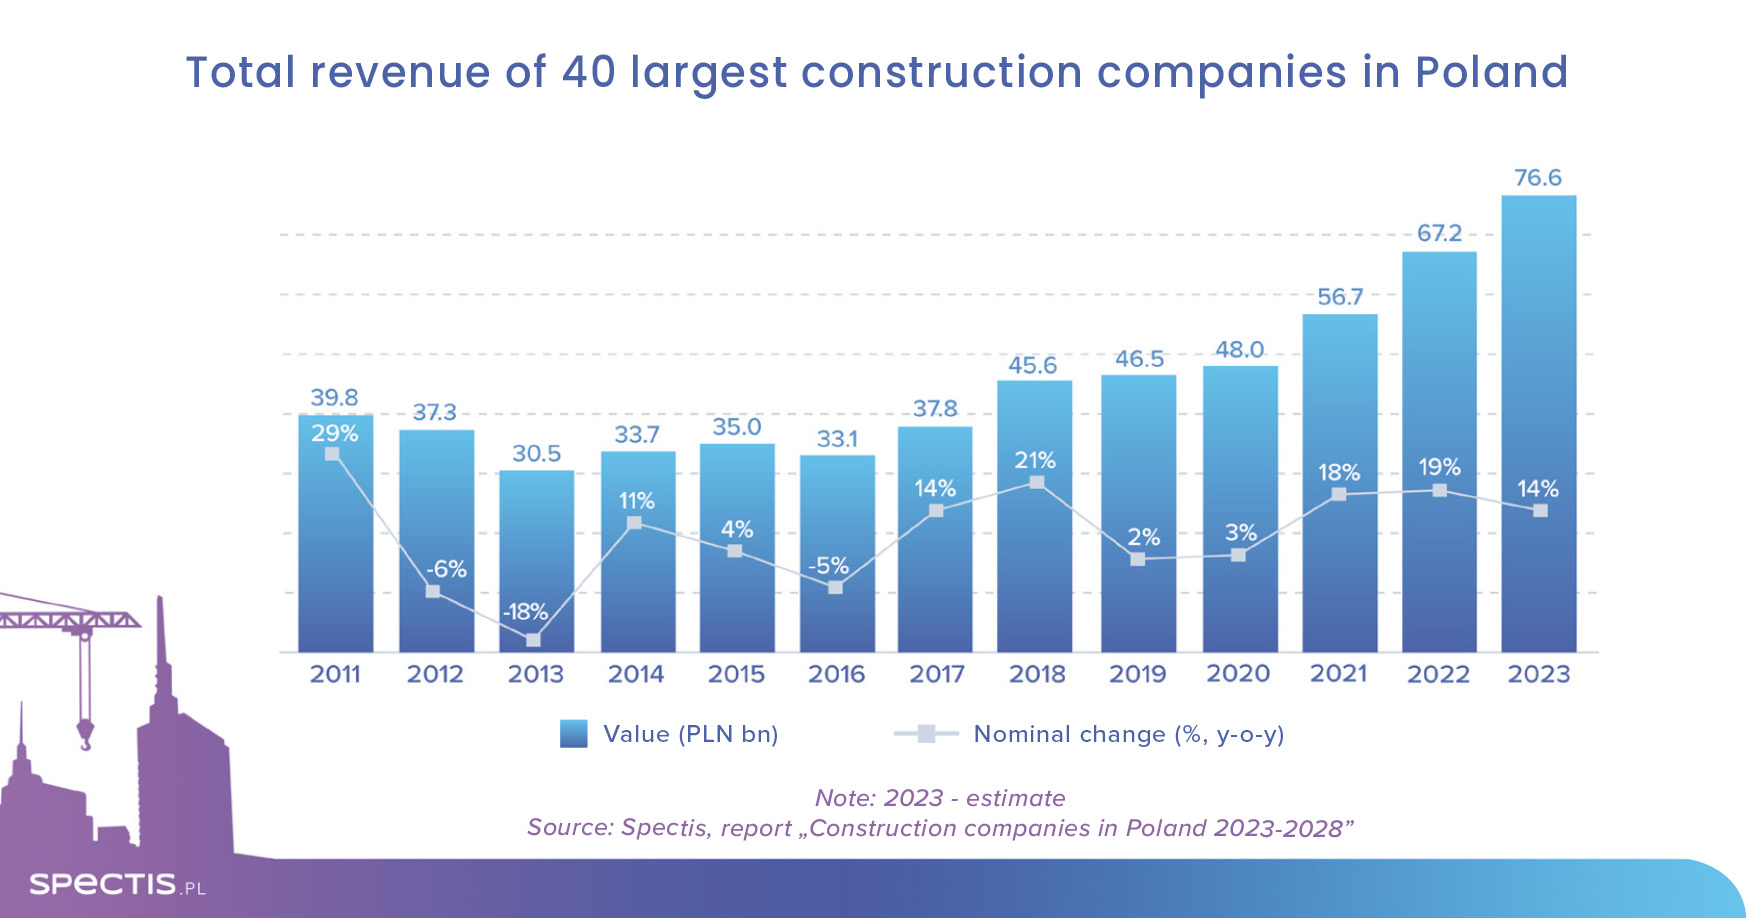 Top 40 construction companies in Poland report nearly PLN 80bn in revenue in 2023